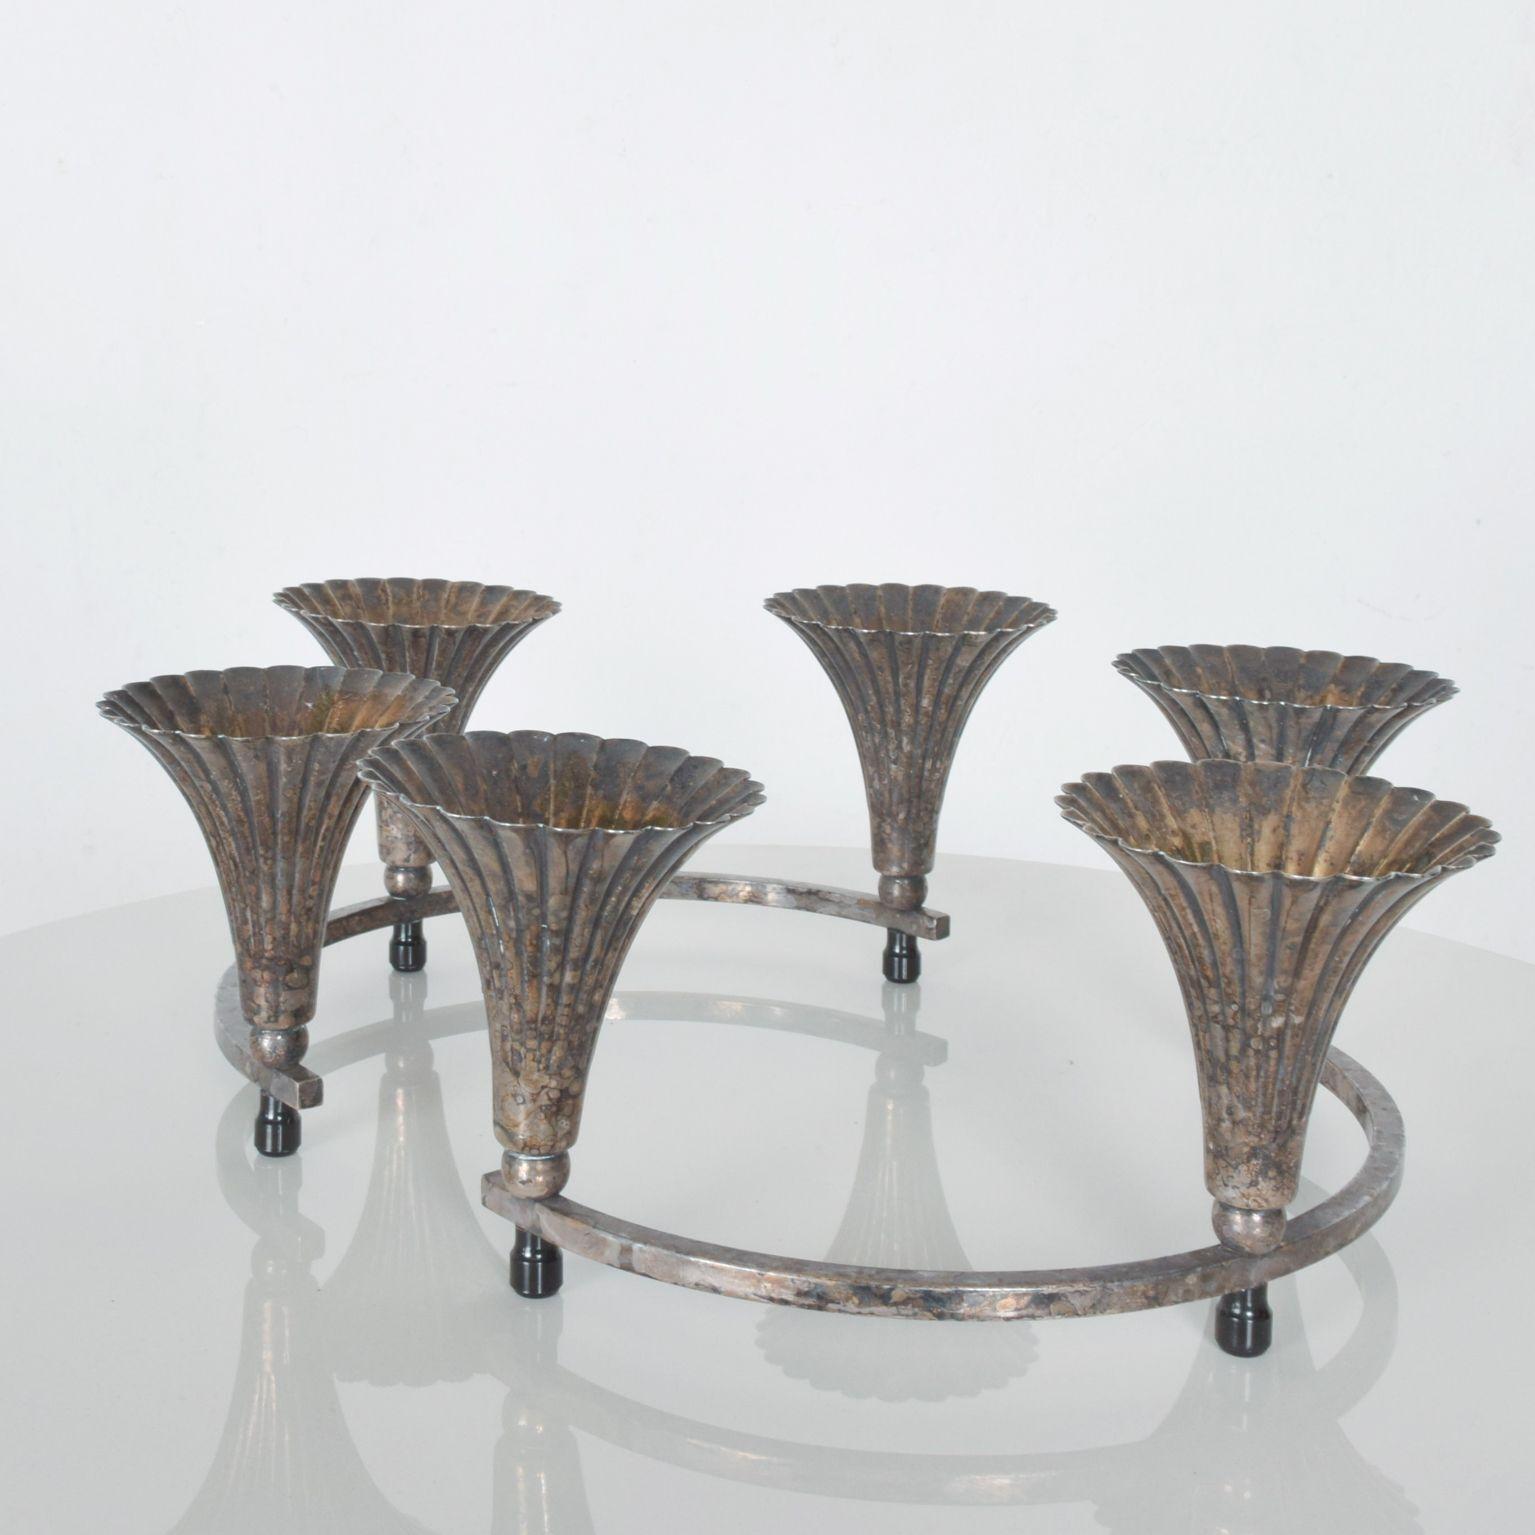 AMBIANIC presents
Sheffield Silver Co, Modern Vintage Circular Candelabra, 2 Candle Holder pieces that can form a lovely circular centerpiece with placement for 3 candles each candelabra. Sold as a set
Each semicircular candleholder has three